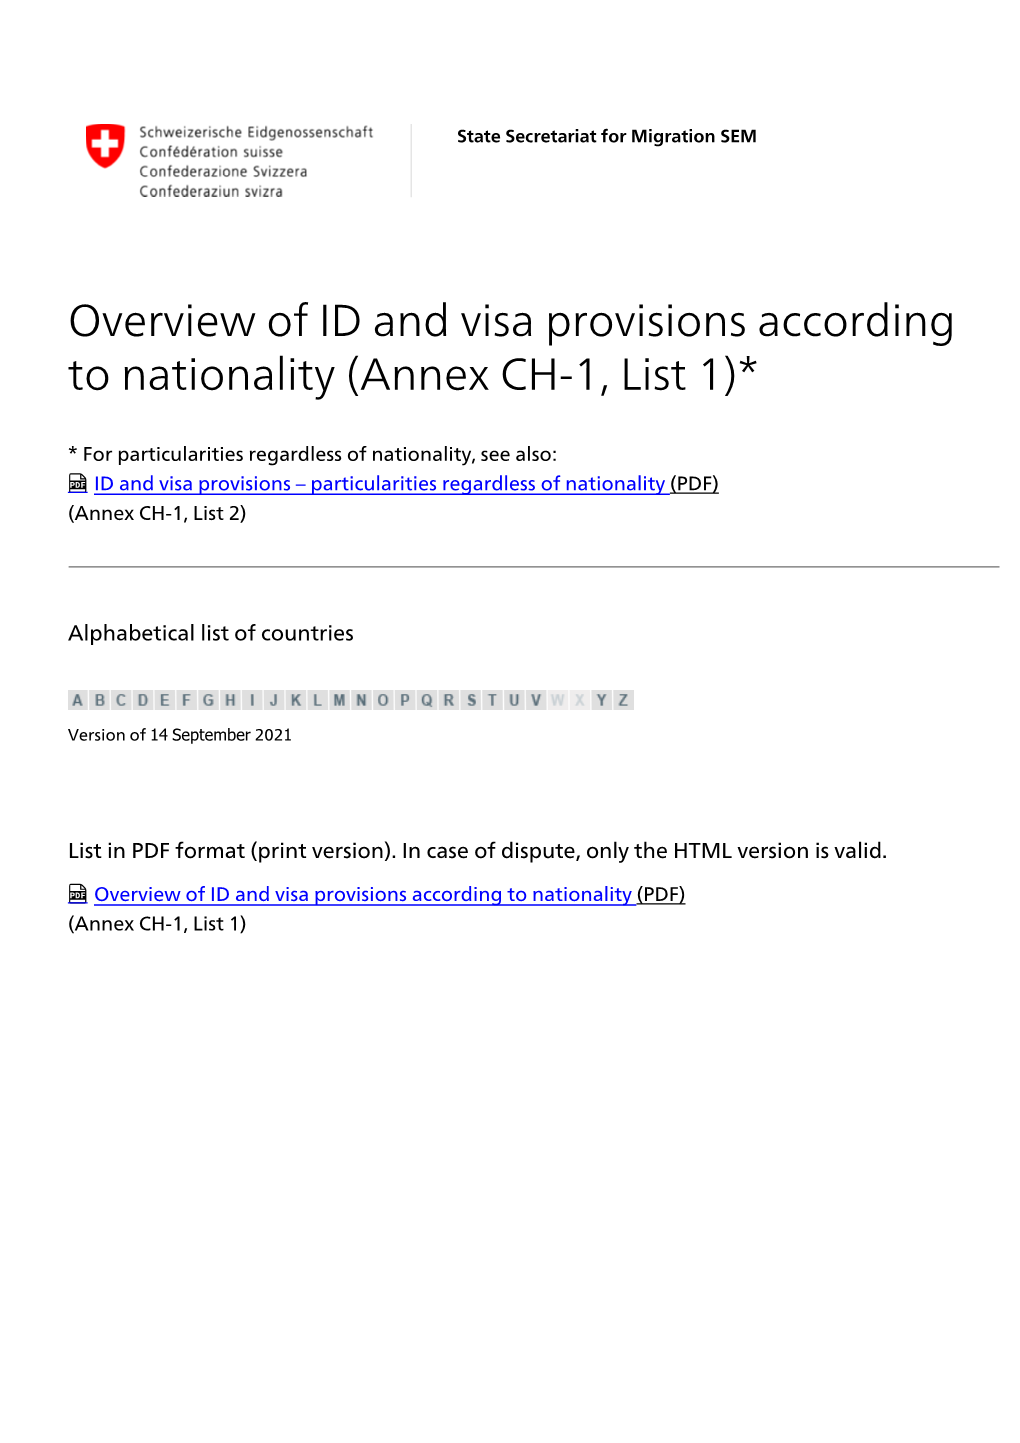 Overview of ID and Visa Provisions According to Nationality (Annex CH-1, List 1)*